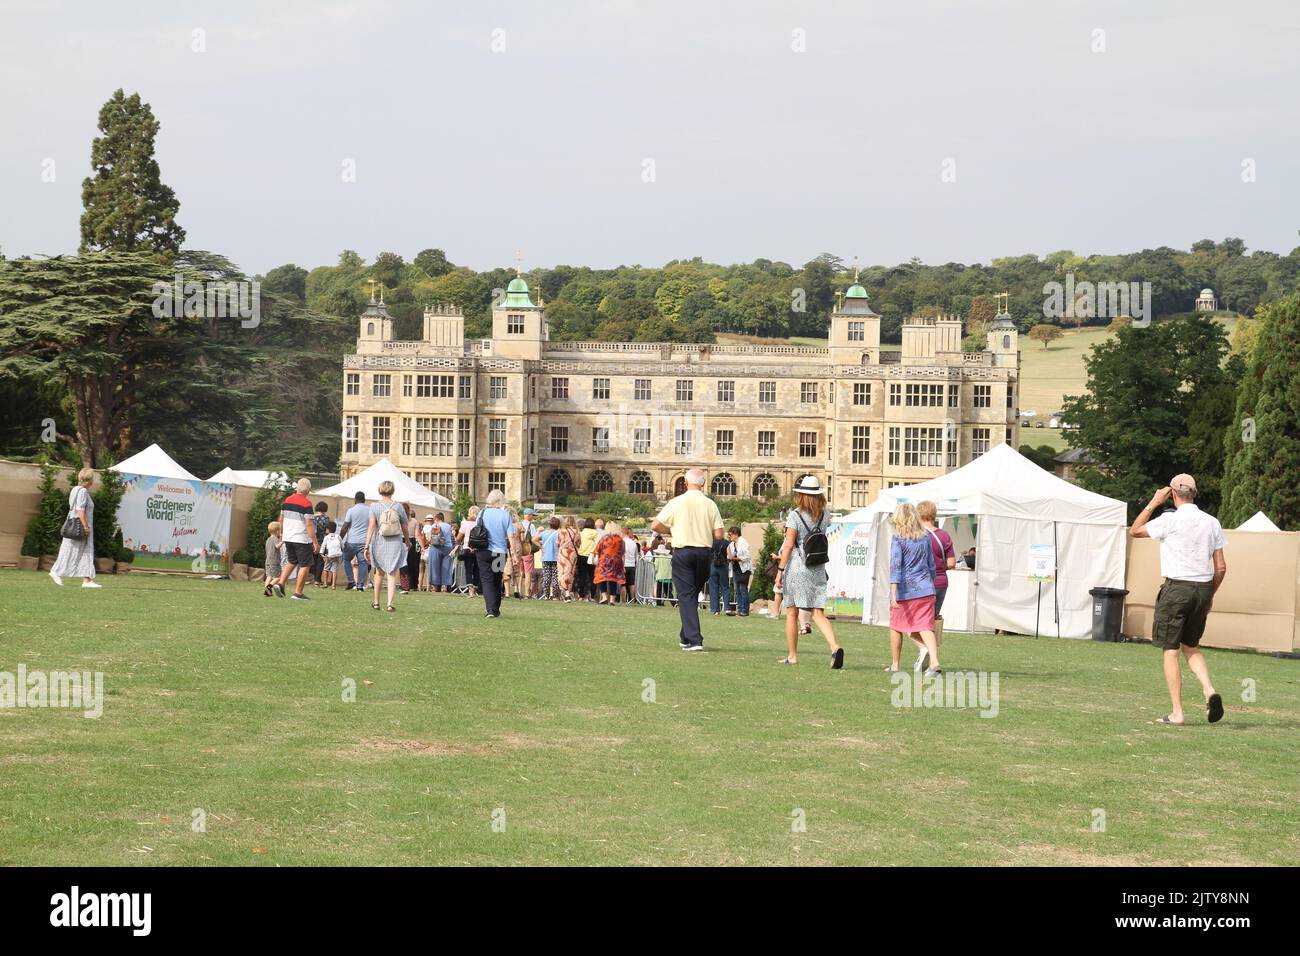 The first ever BBC Gardeners' World Autumn Fair is taking place at Audley End House in Essex. People making their way into the event. Stock Photo